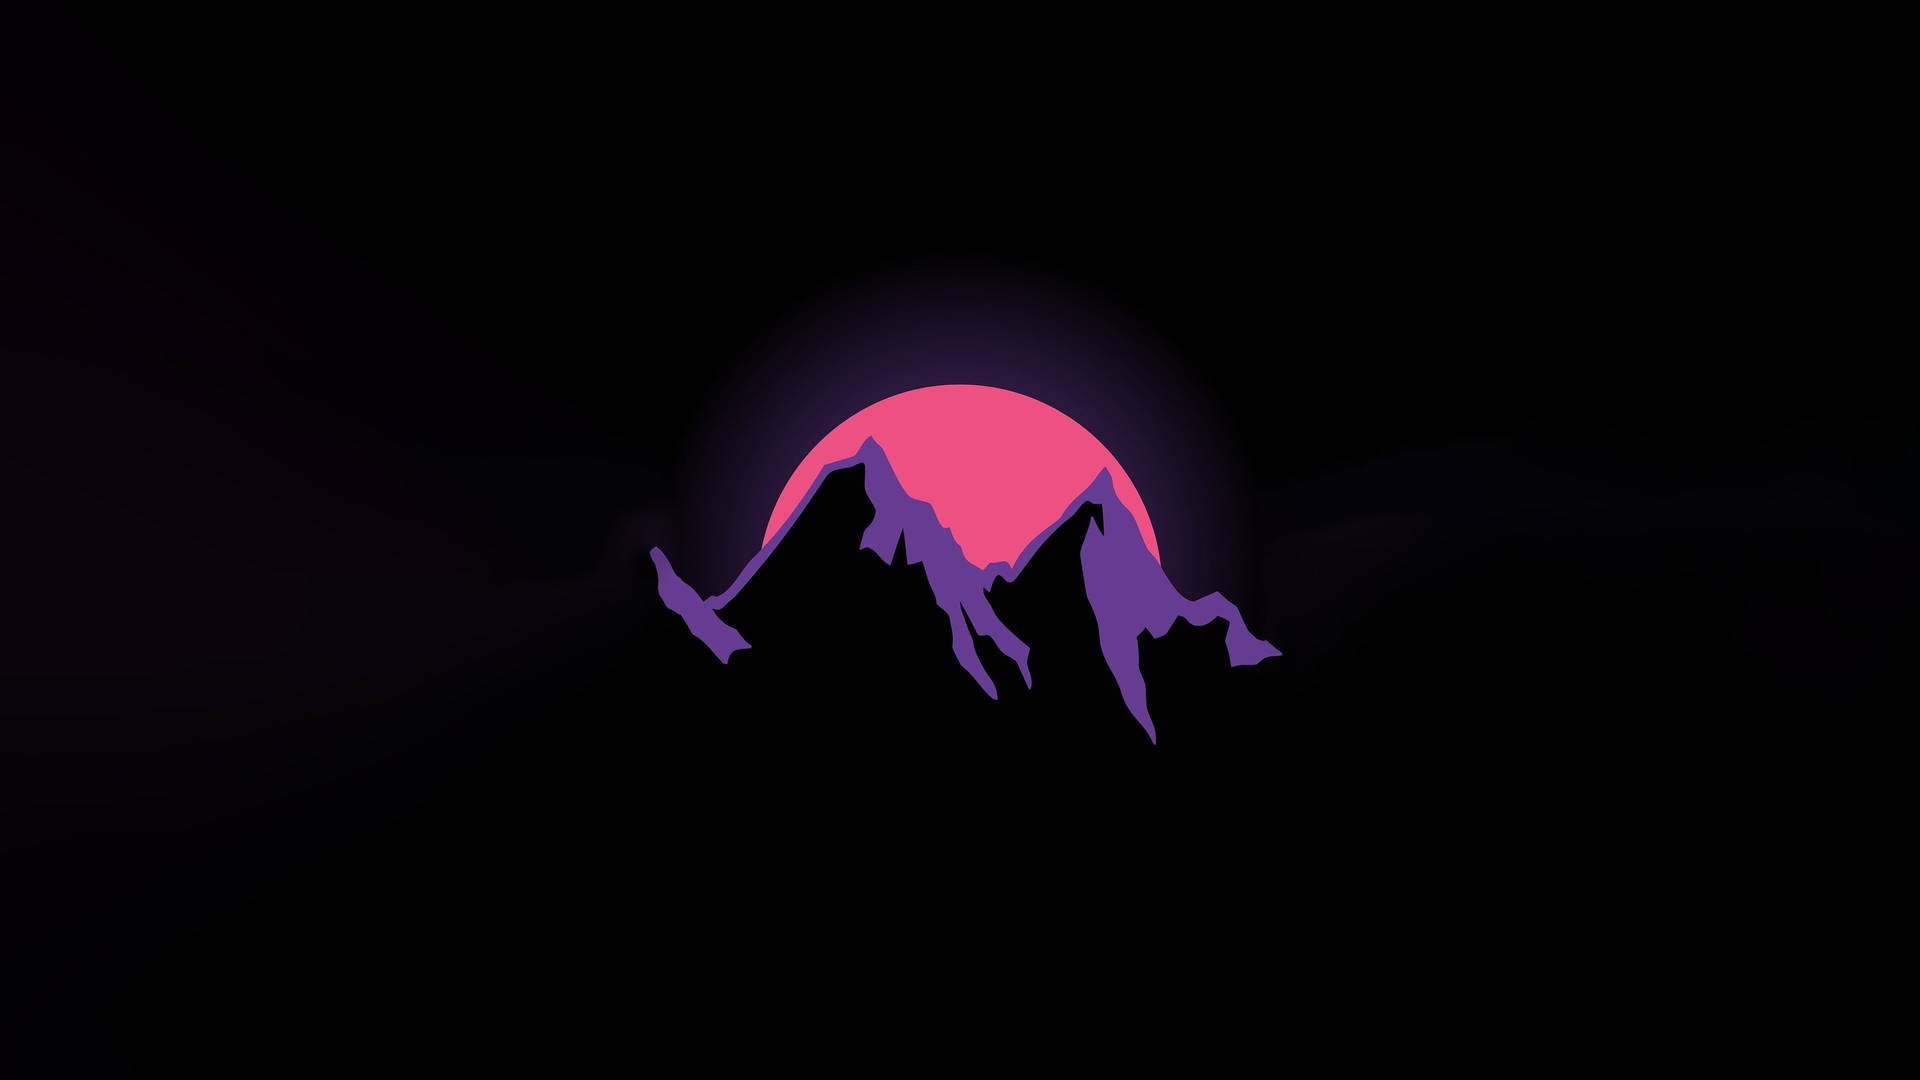 Dark Minimalist Mountains And The Moon Picture